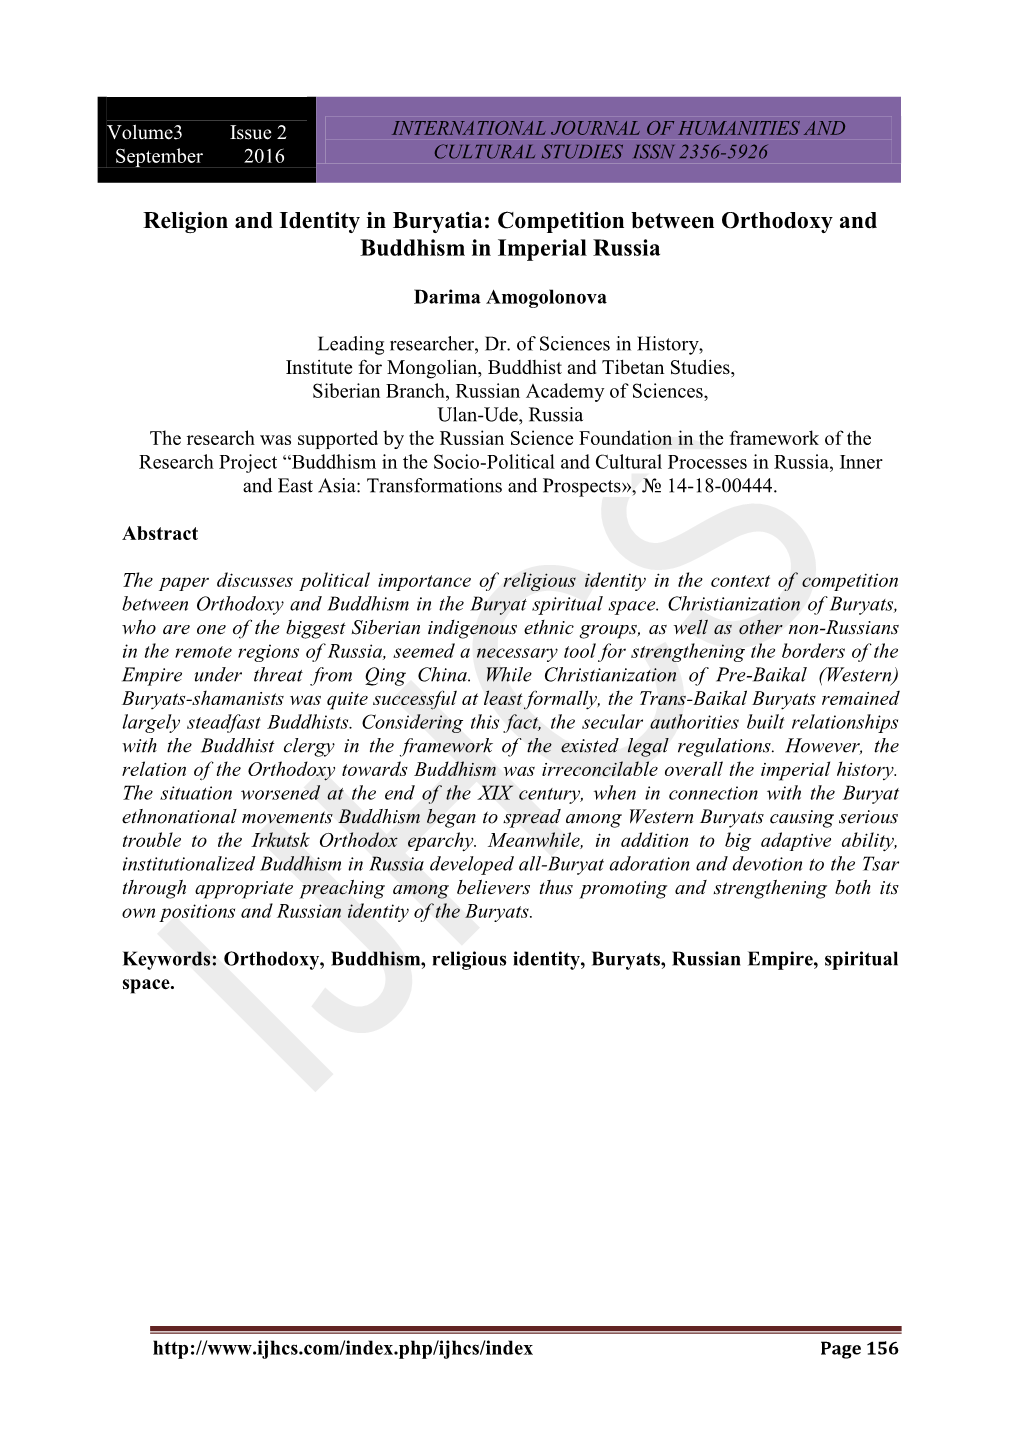 Religion and Identity in Buryatia: Competition Between Orthodoxy and Buddhism in Imperial Russia